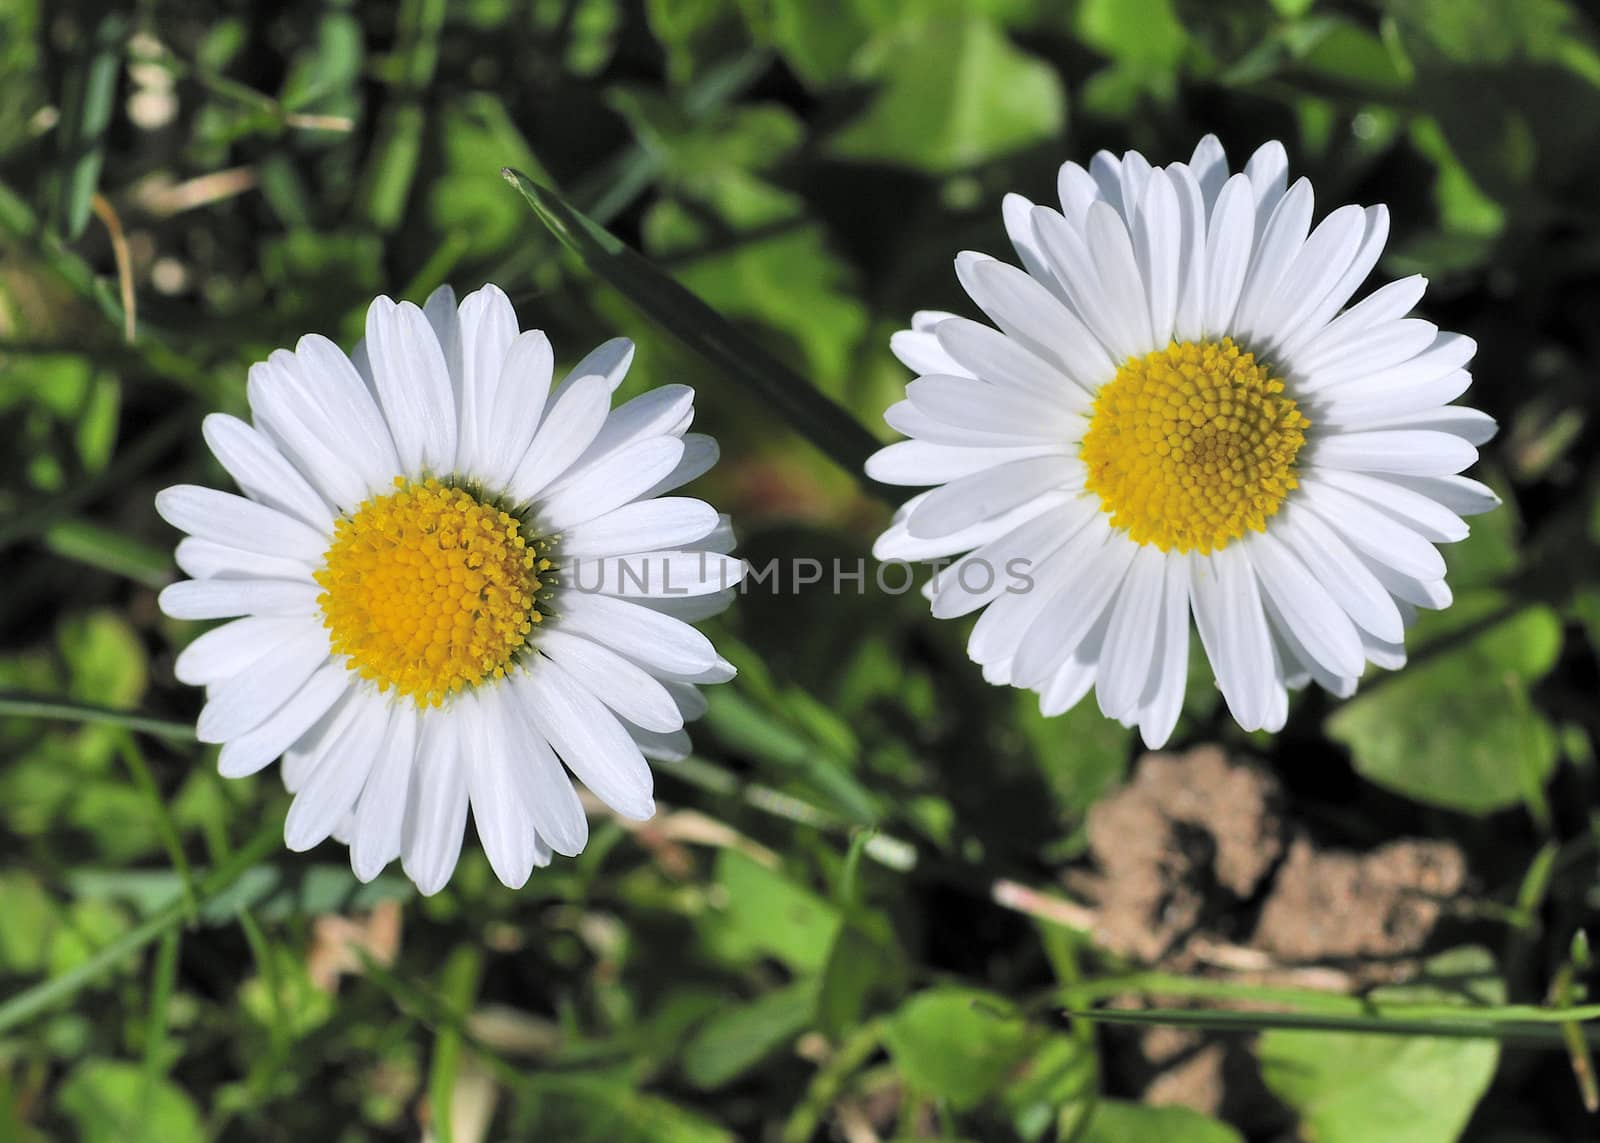 A pair of early spring Daisies in sunlight.